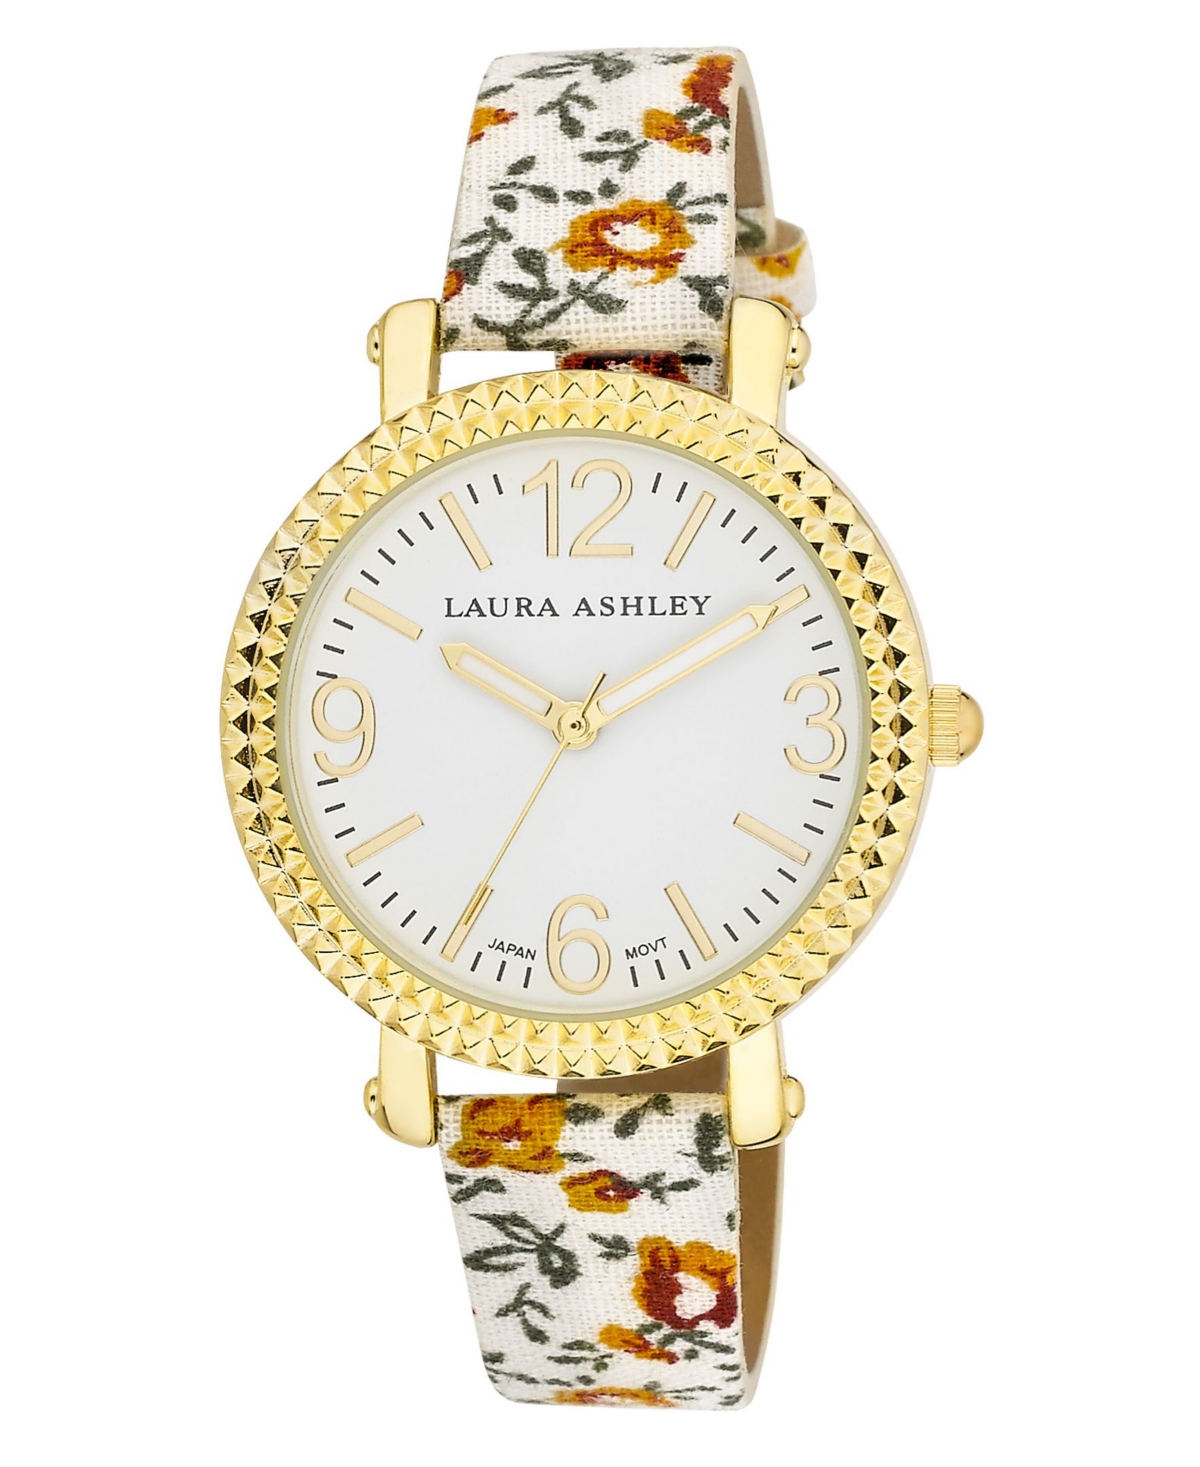 Laura Ashley Women's White Floral Band Fluted Bezel Watch